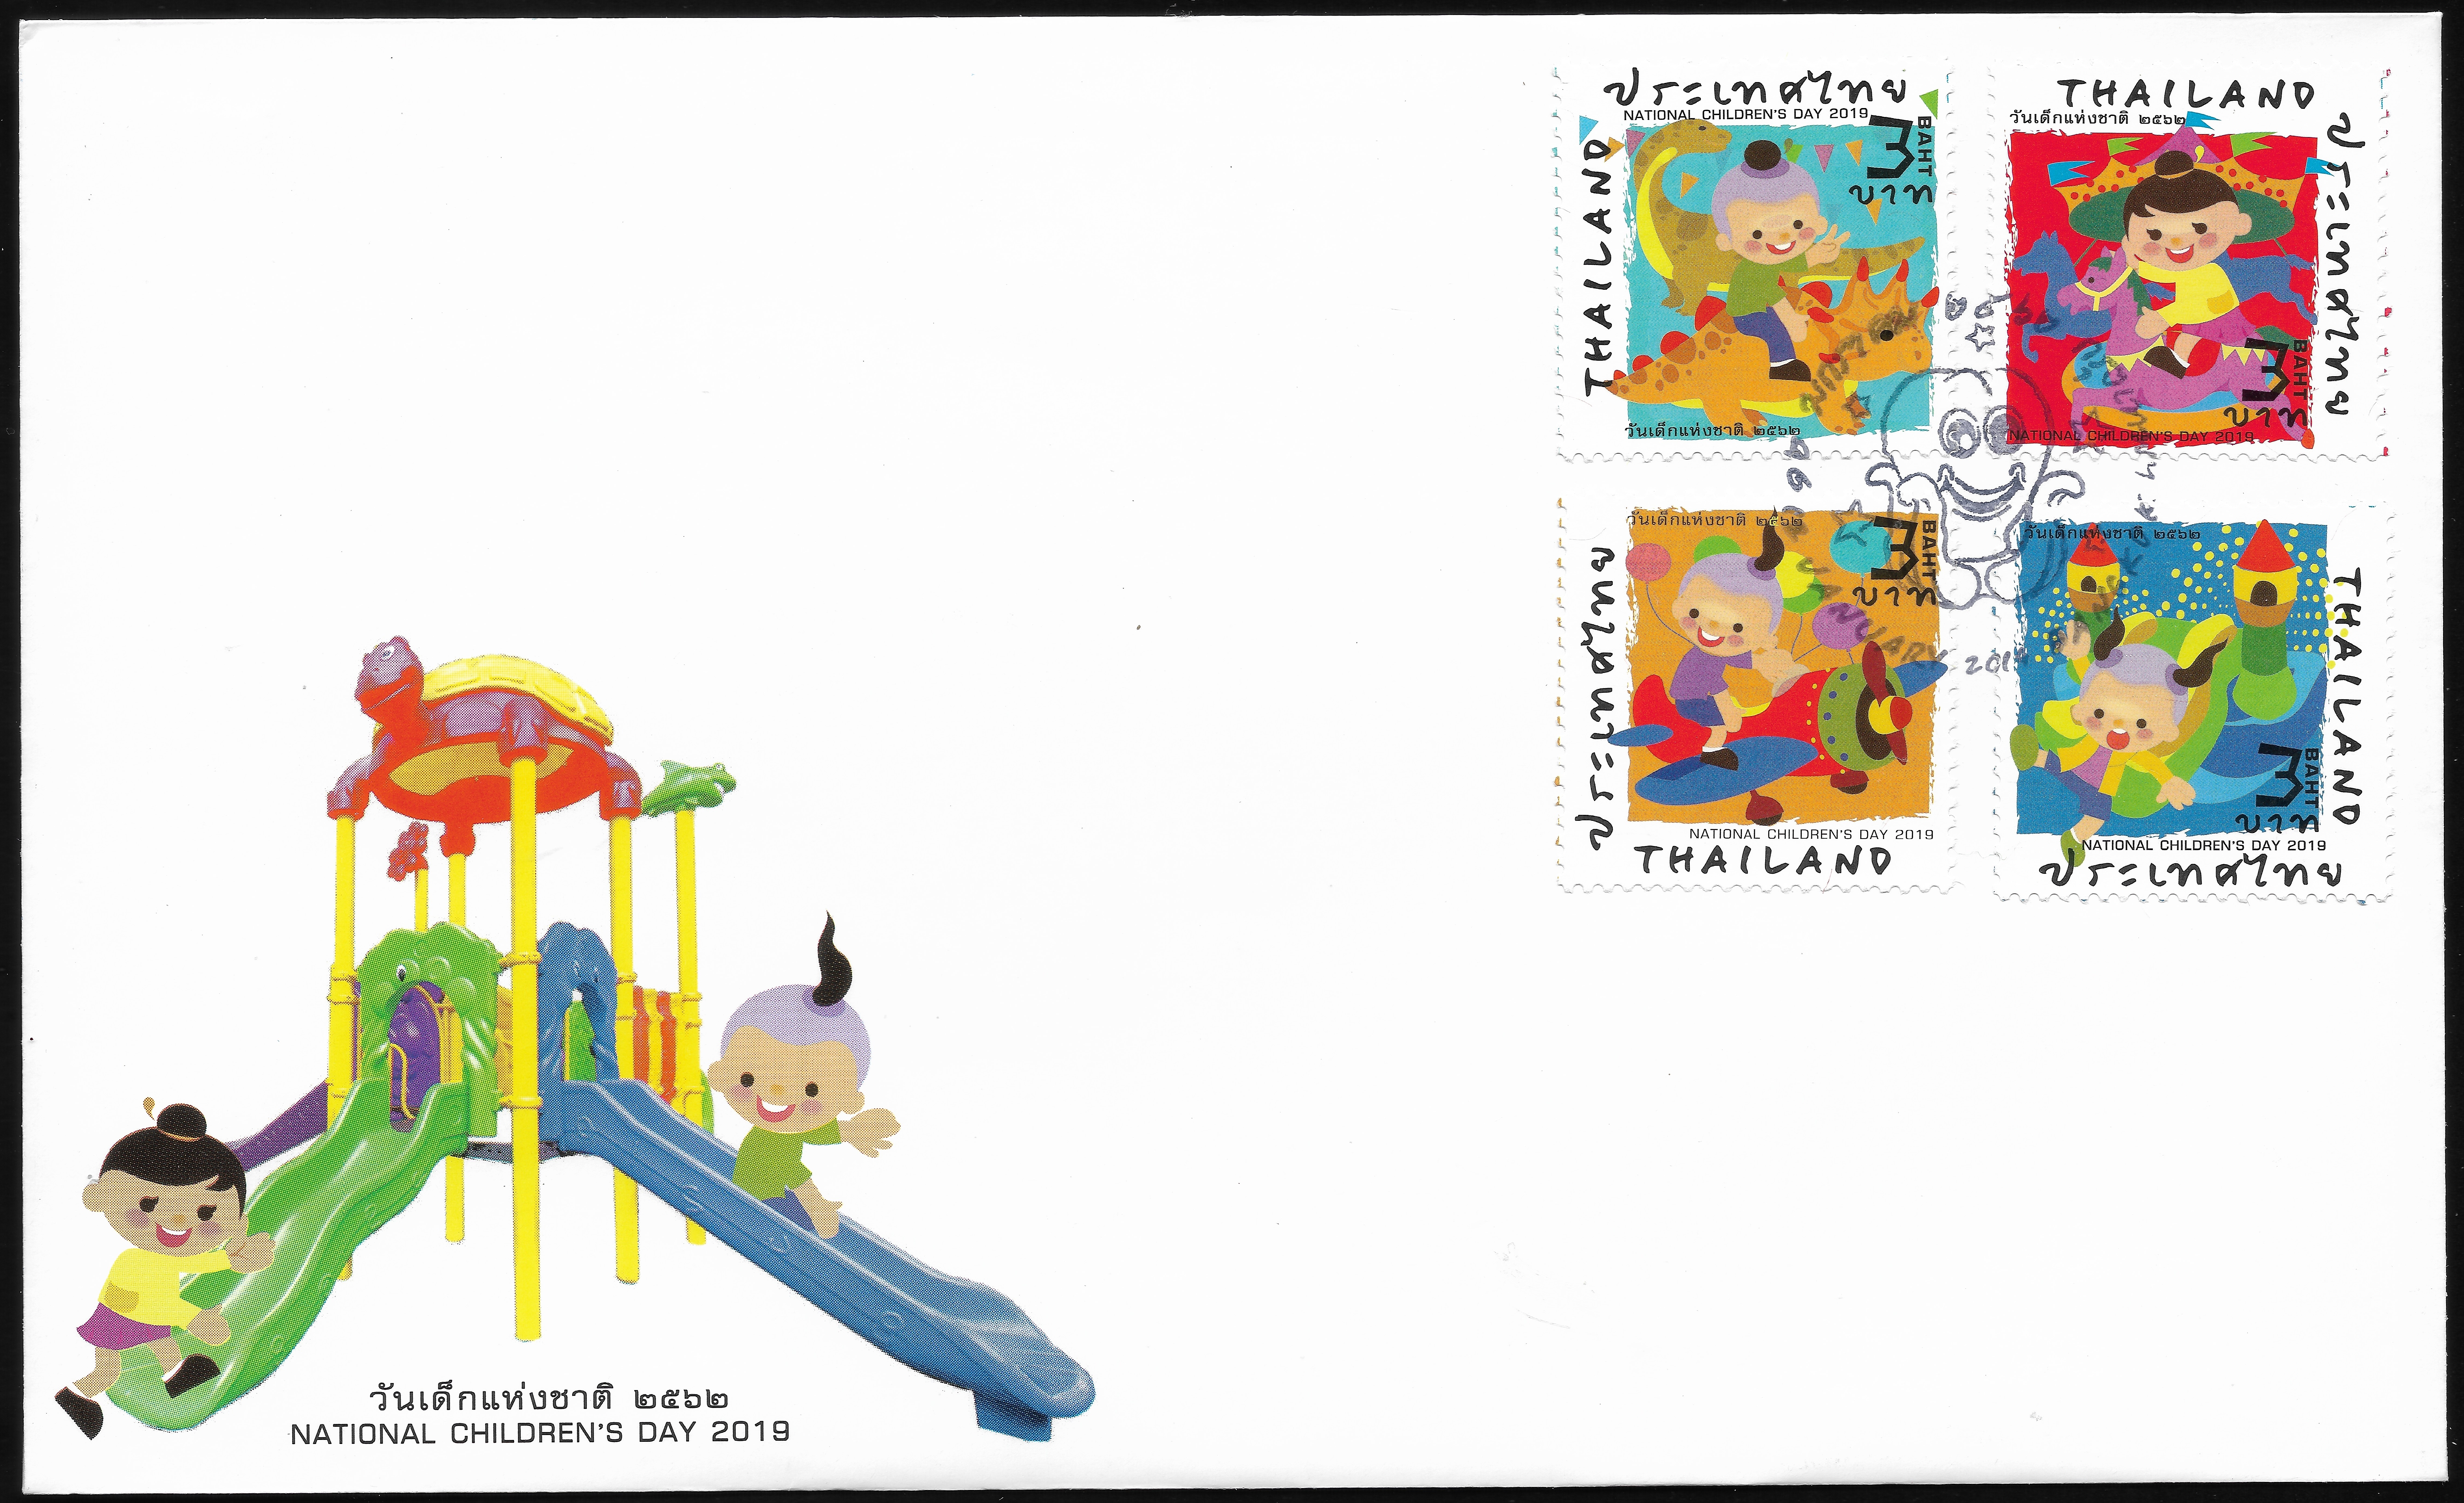 Thailand - Thailand Post #TH-1163 (January 12, 2019) first day cover - my scan